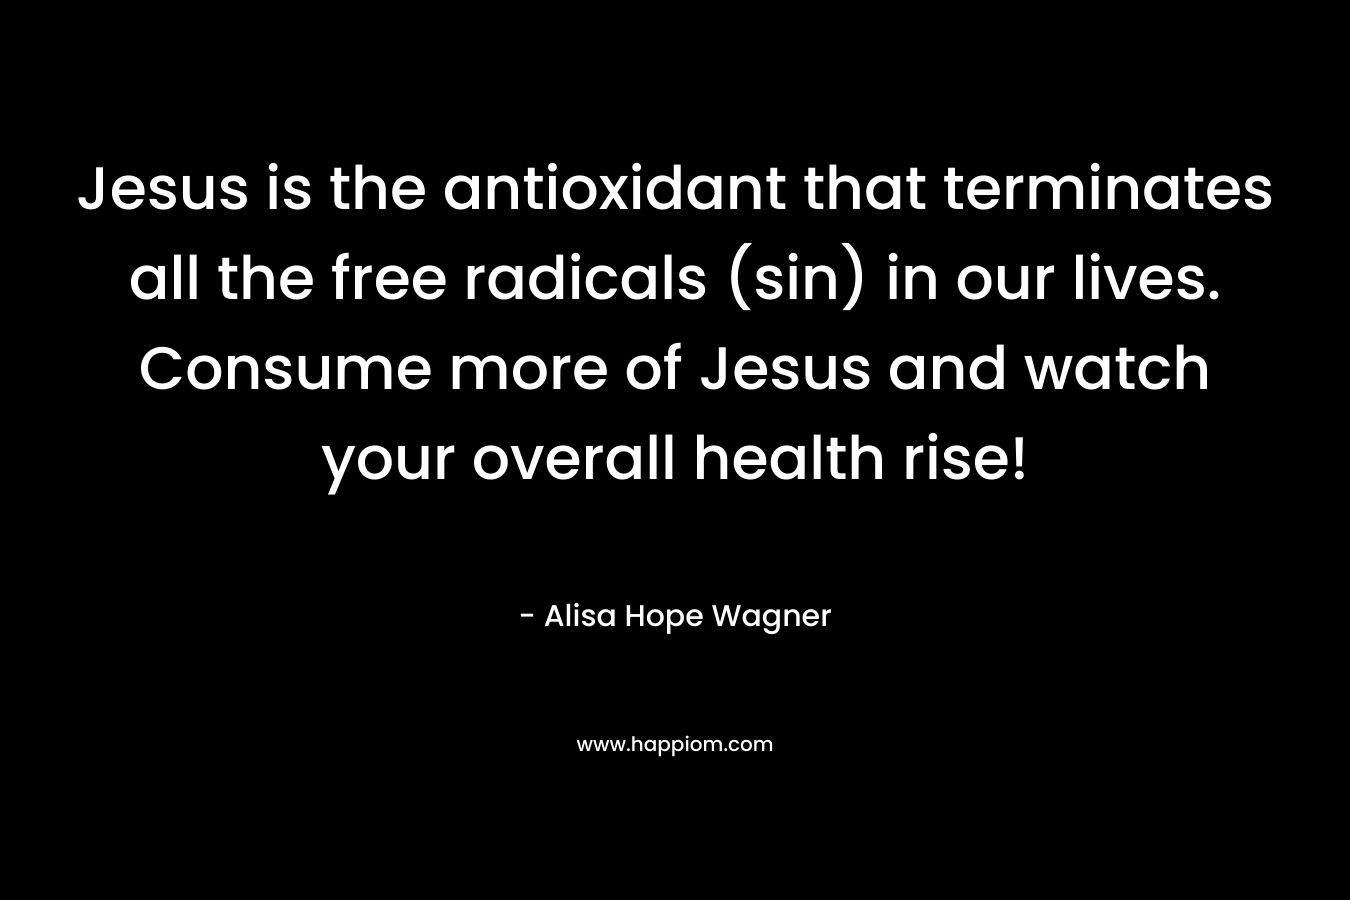 Jesus is the antioxidant that terminates all the free radicals (sin) in our lives. Consume more of Jesus and watch your overall health rise! – Alisa Hope Wagner